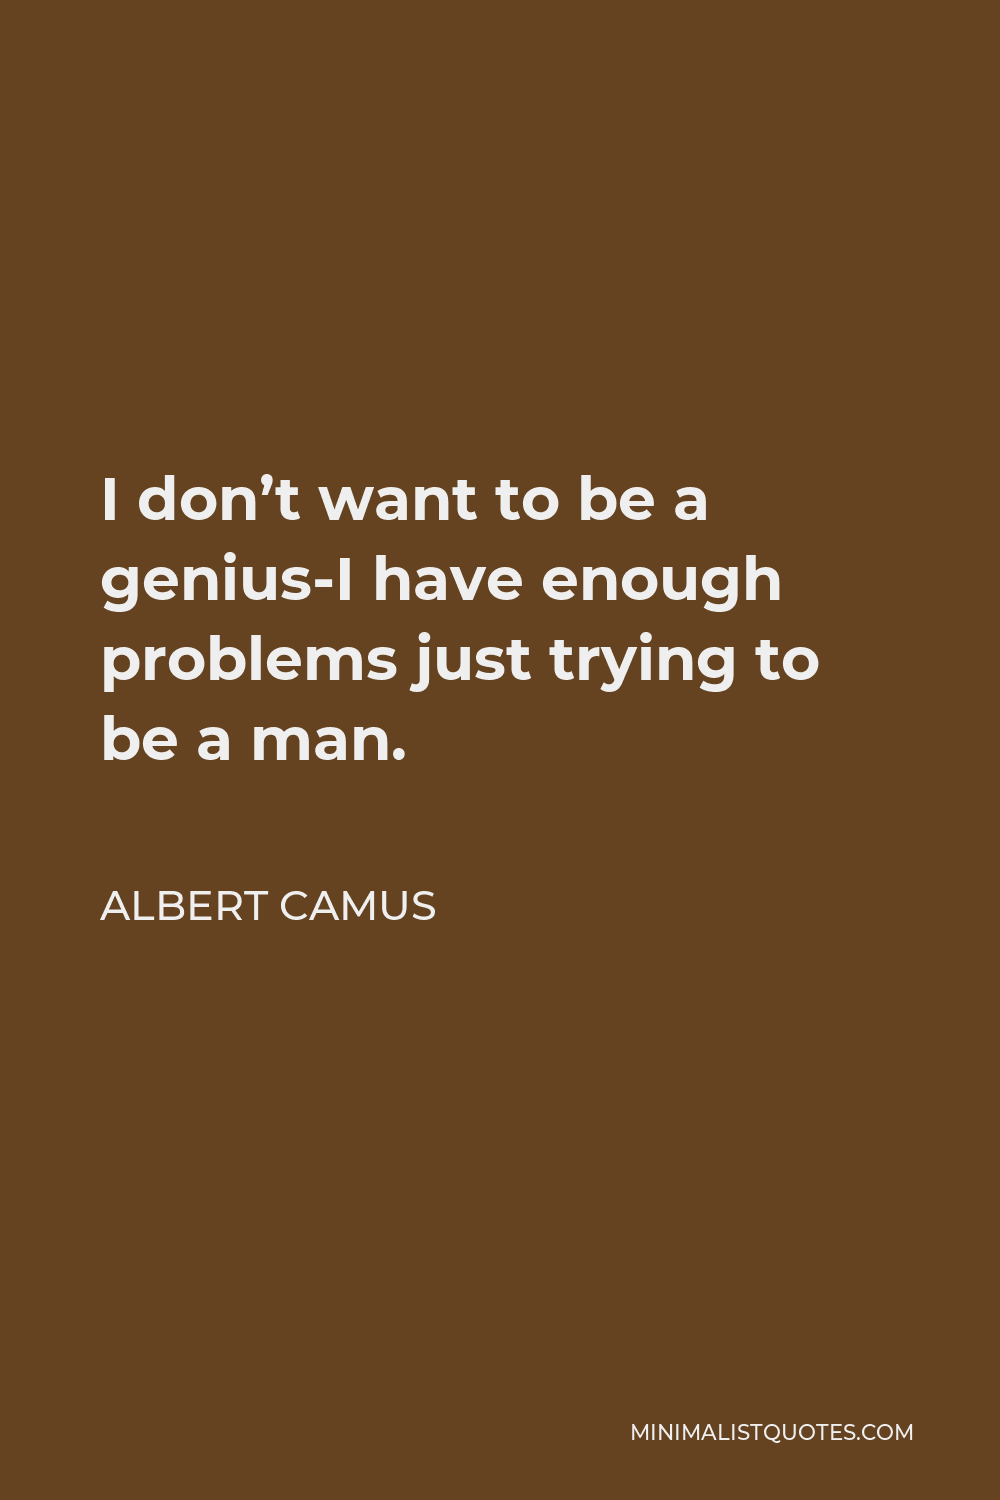 Albert Camus Quote - I don’t want to be a genius-I have enough problems just trying to be a man.